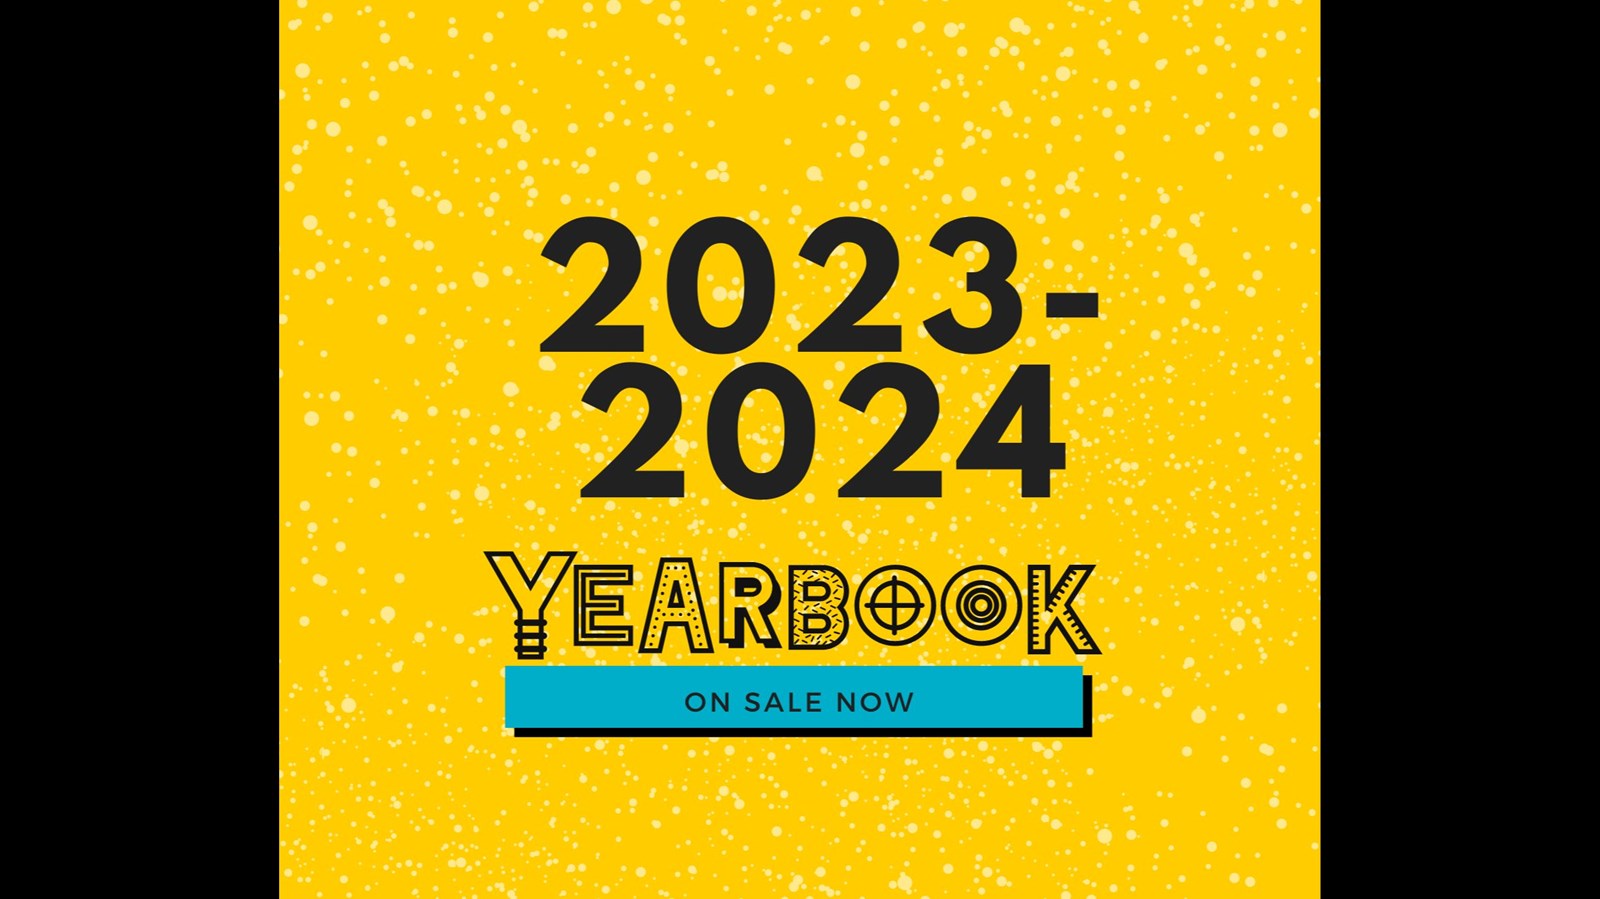 2023-2024 Yearbook on sale now